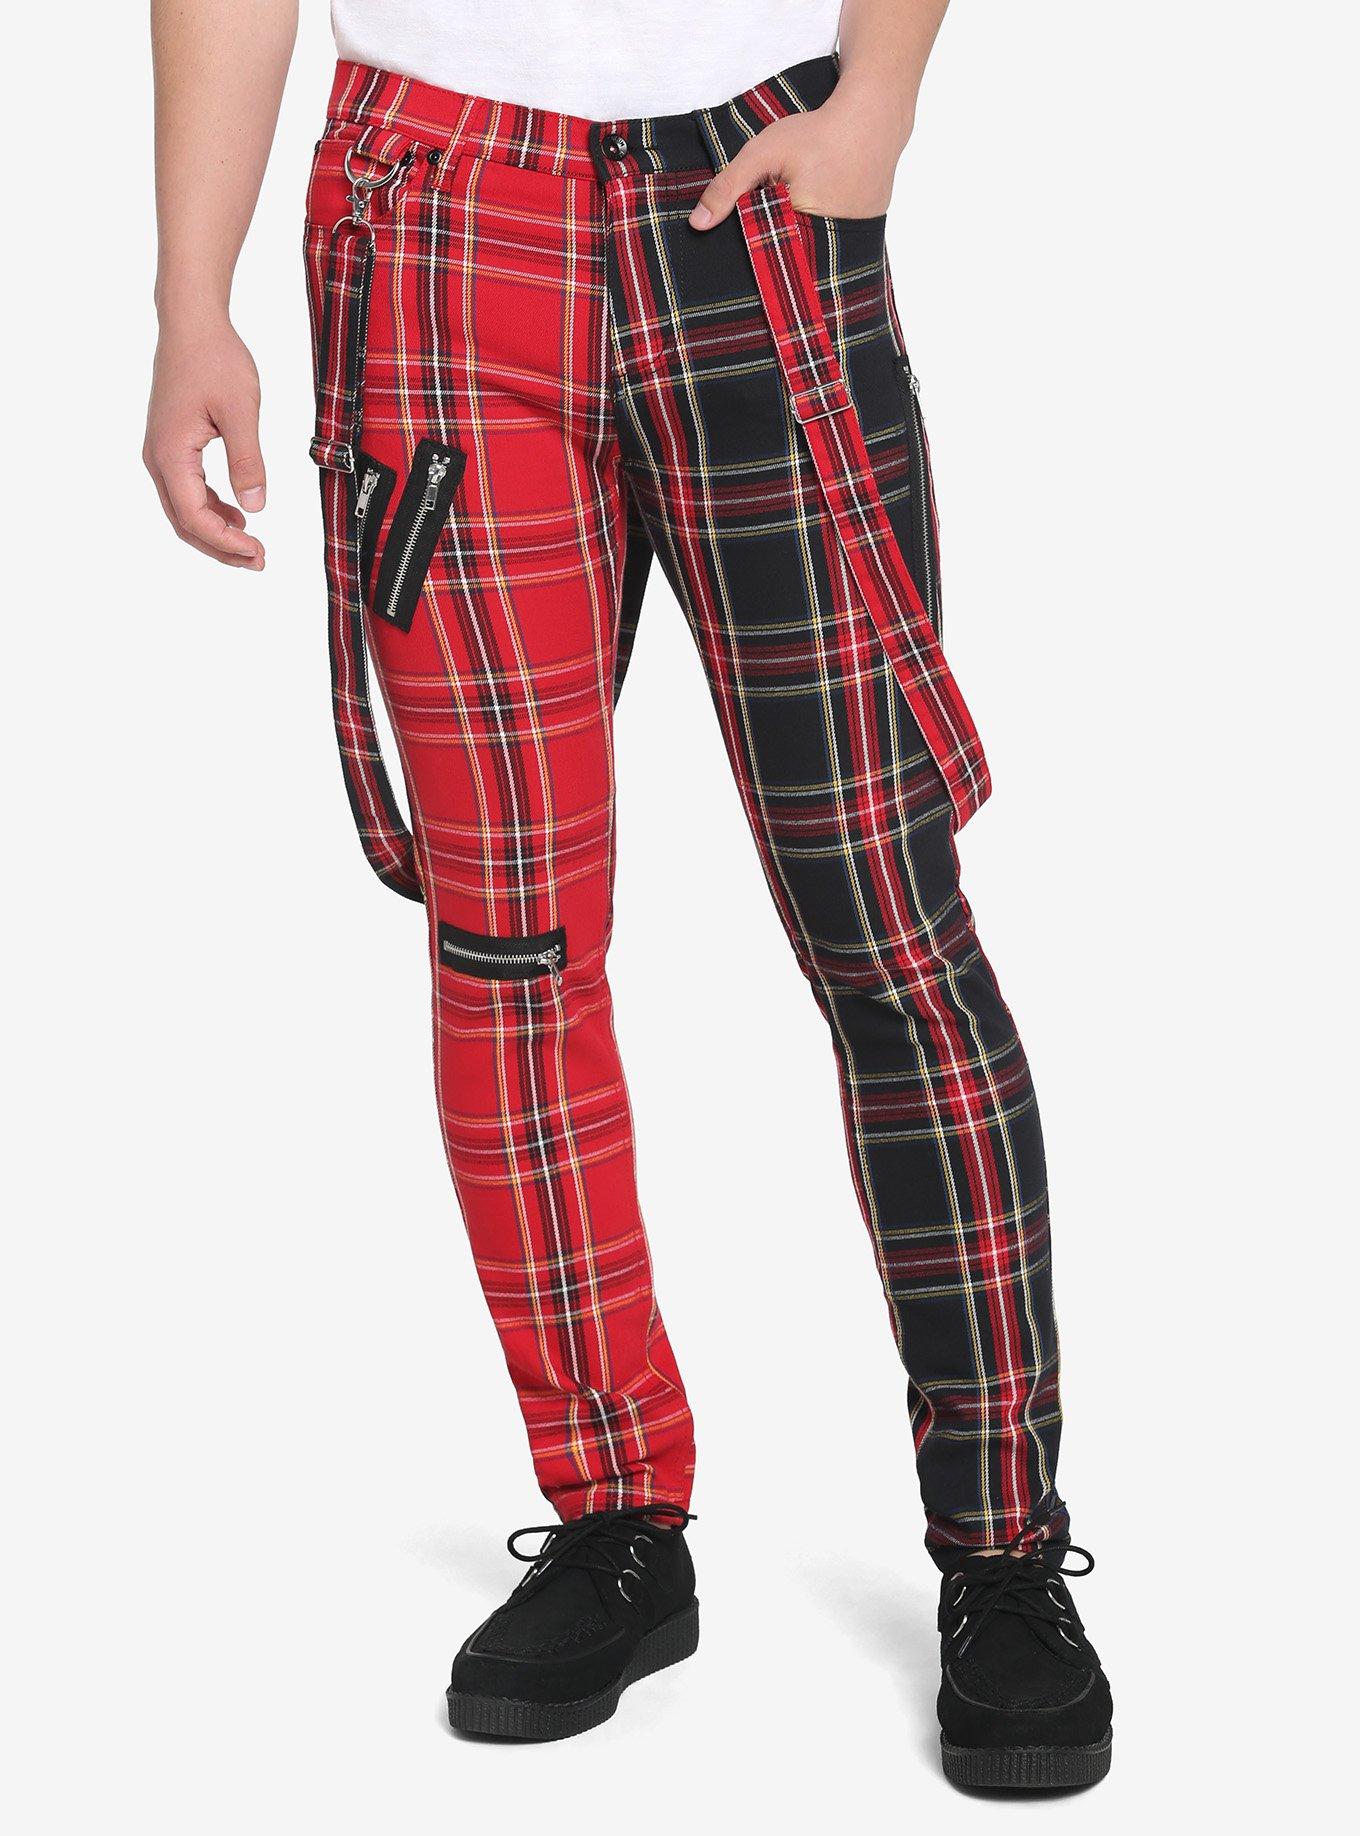 Hot Topic [NEW] Black & Rainbow Split Plaid Stinger Jeans With Chain Size  28 - $32 - From T